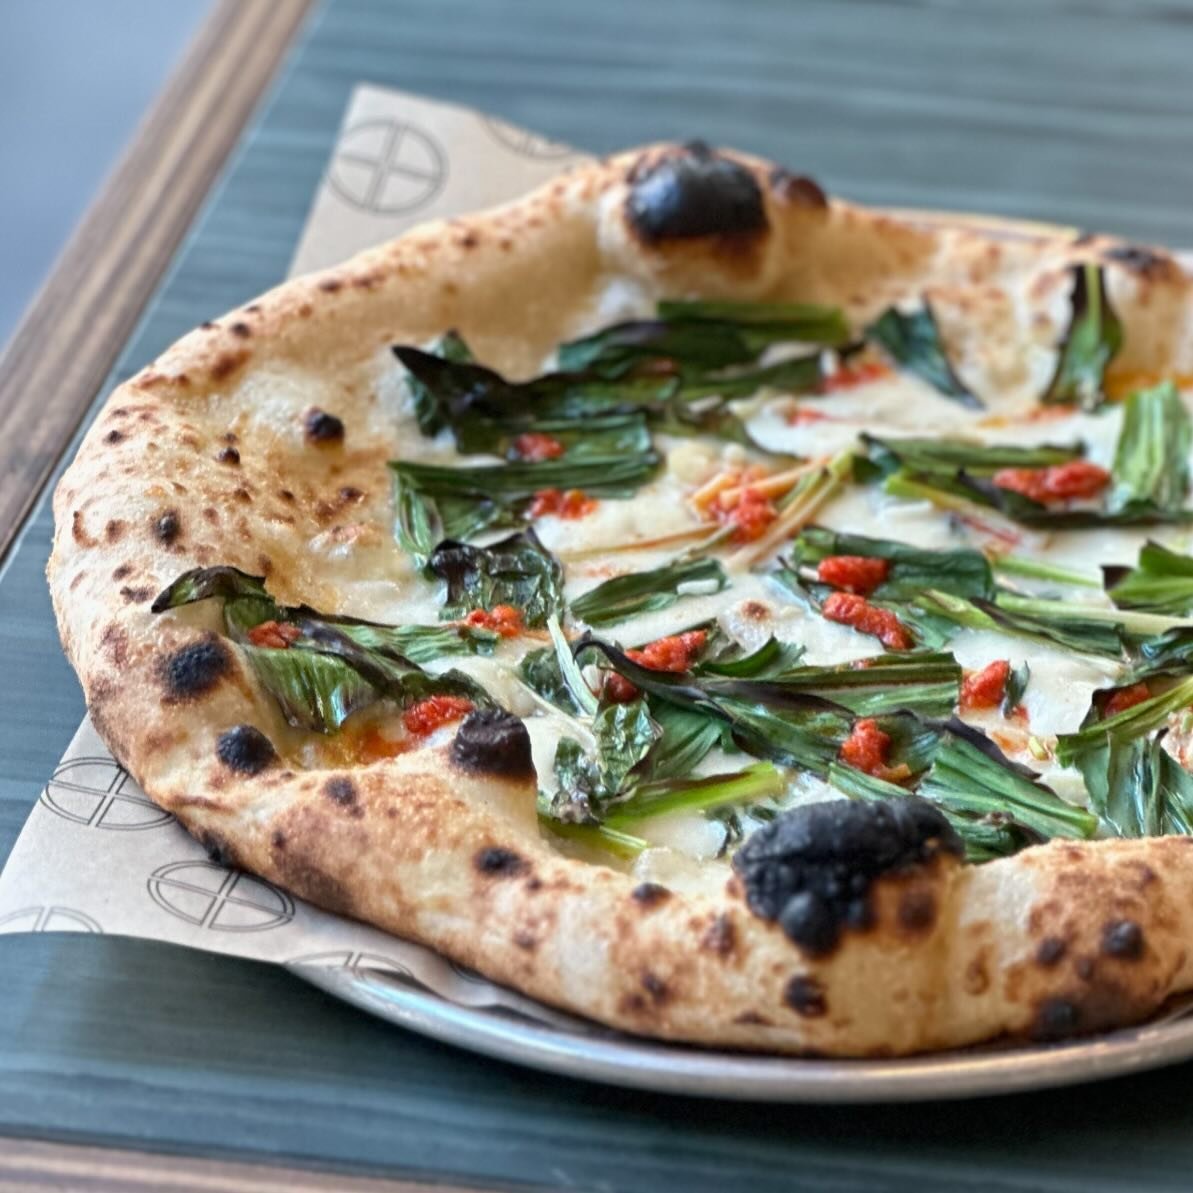 Have you tried our Ramps Pizza yet? Hurry up!
It&rsquo;s only available for the month of May